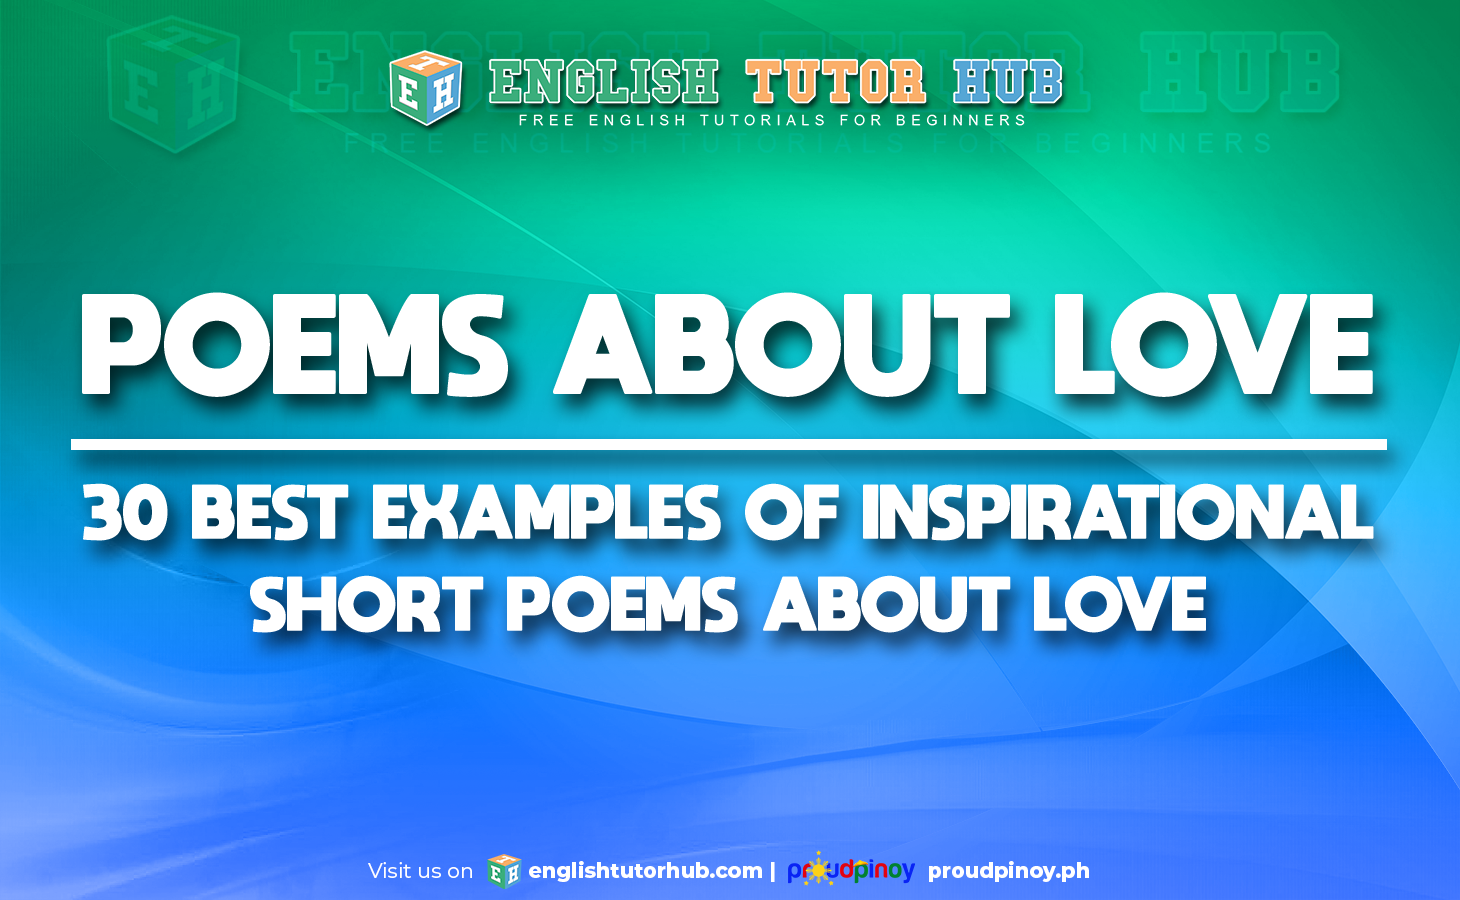 POEMS ABOUT LOVE - 30 BEST EXAMPLES OF INSPIRATIONAL SHORT POEMS ABOUT LOVE